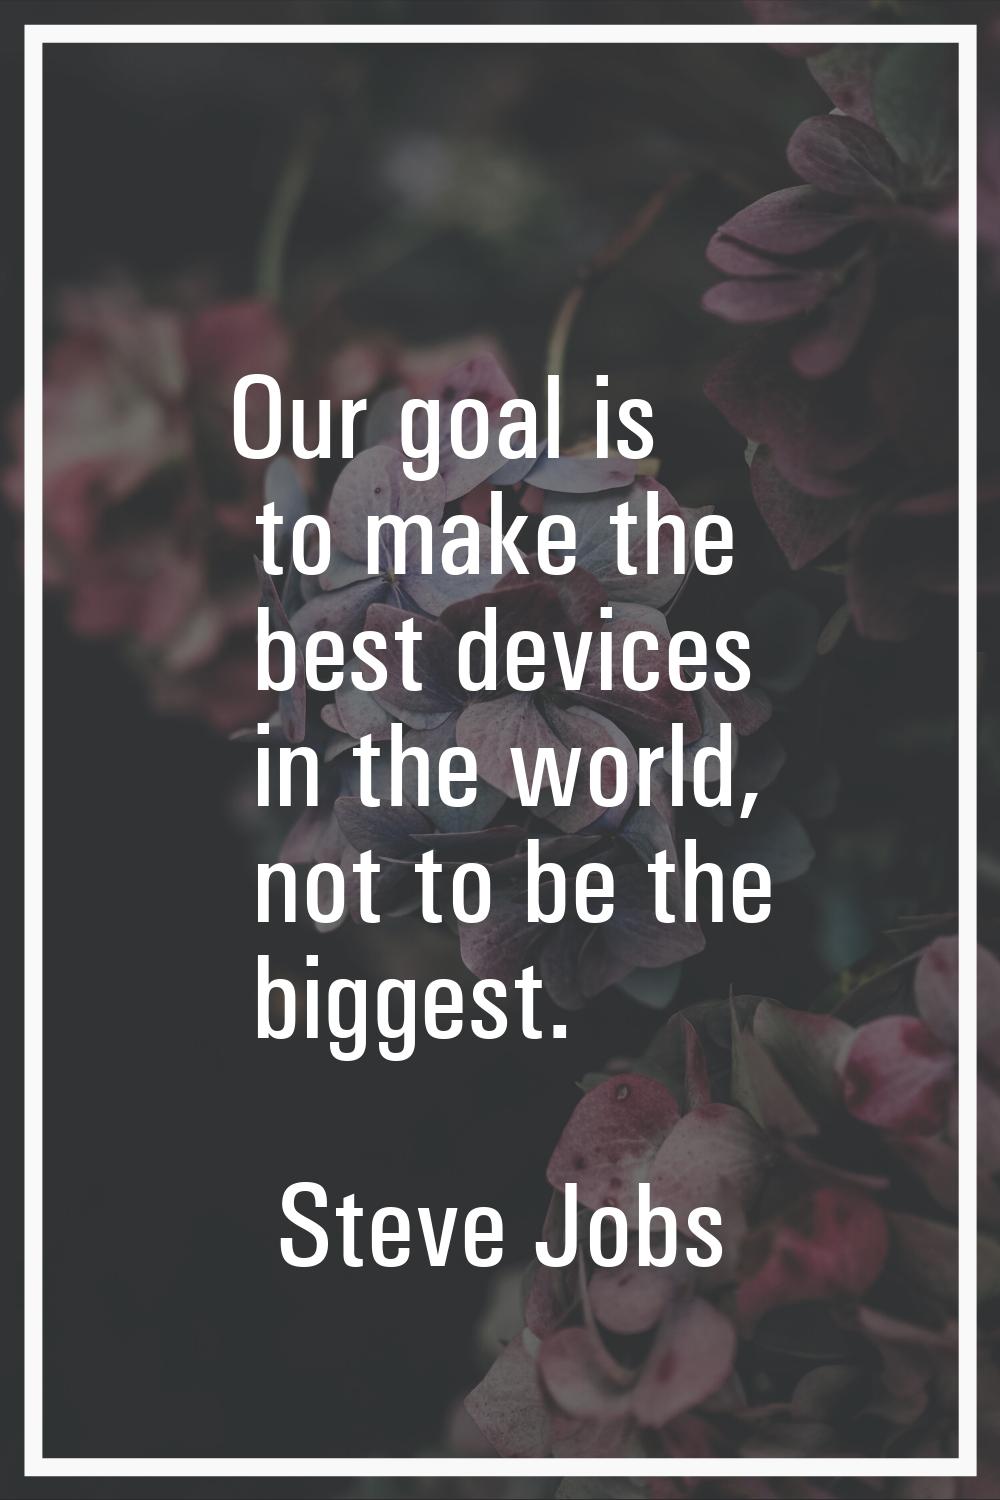 Our goal is to make the best devices in the world, not to be the biggest.